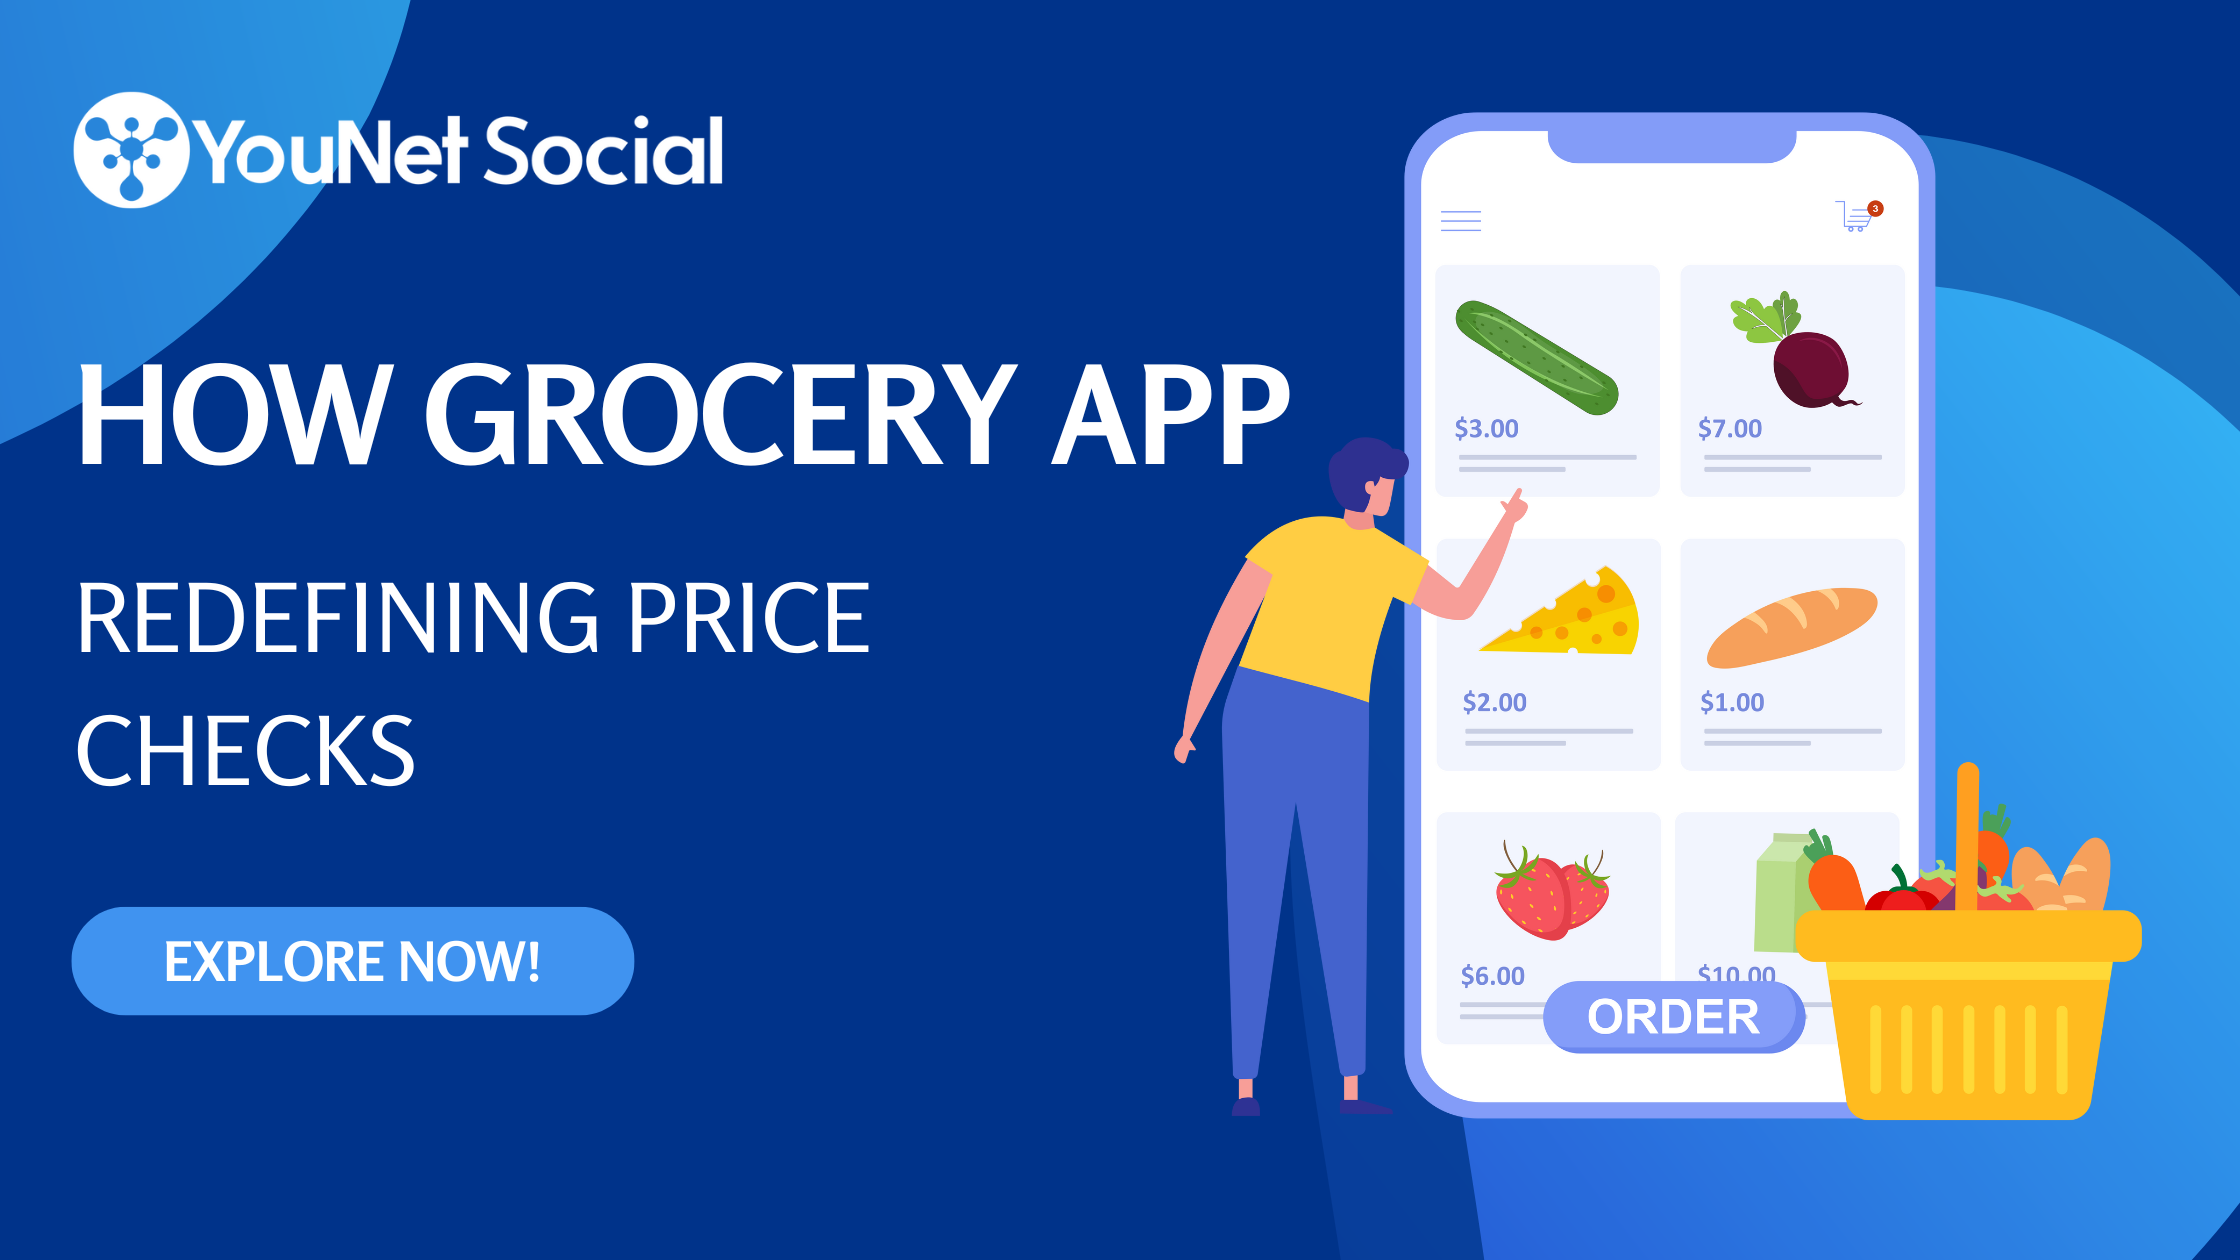 Challenges of Offline Shopping and How the Grocery App Helps to Solve Them